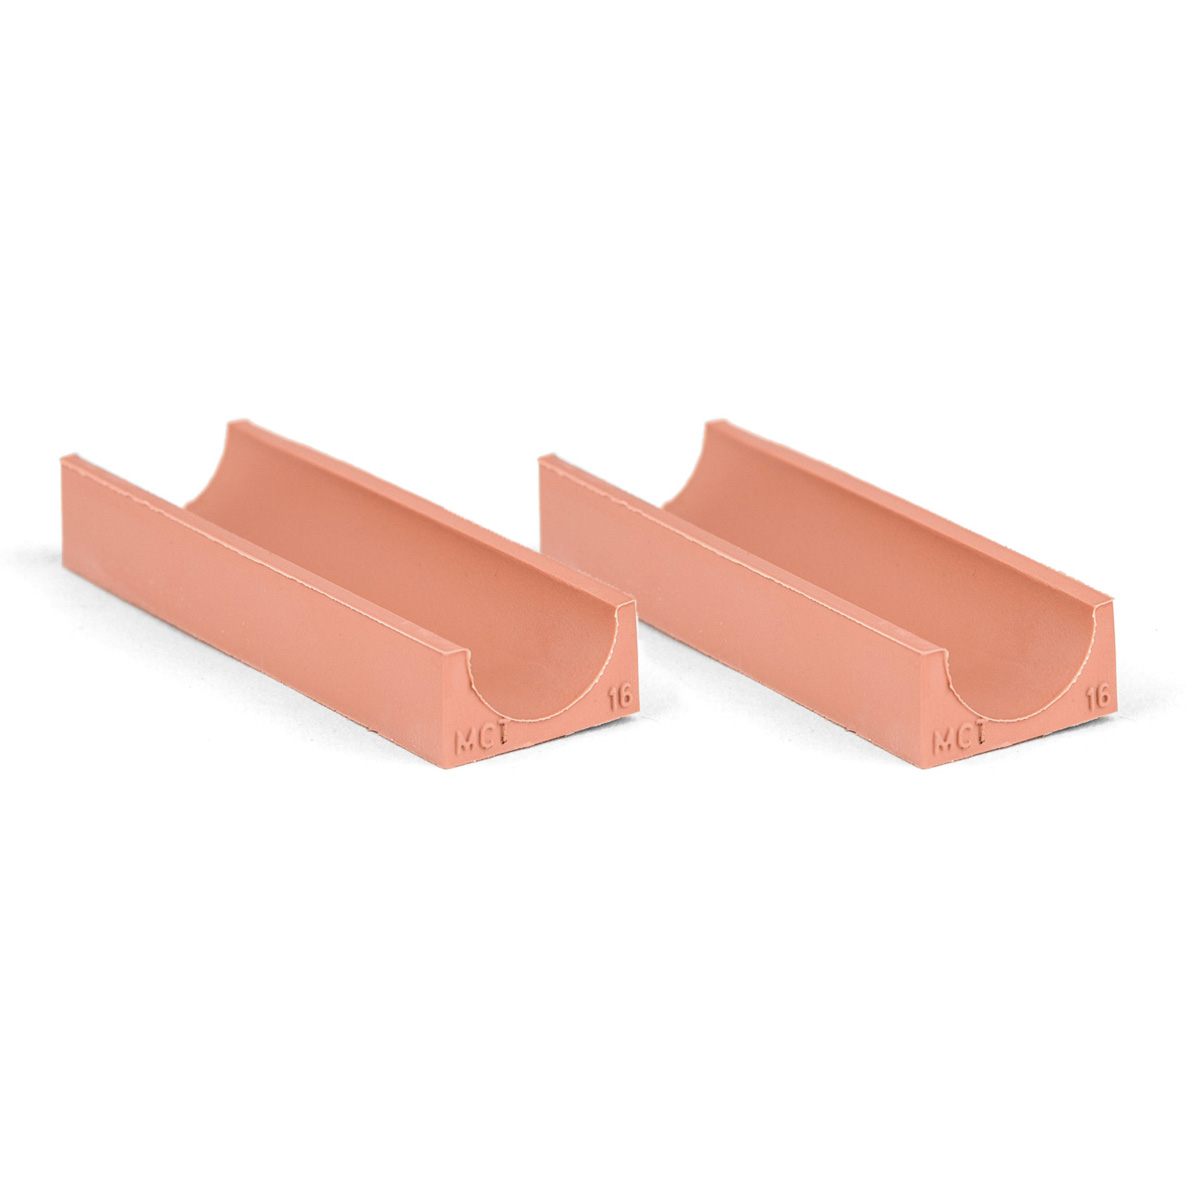 20-16*2 Set of 2 half insert block lycron, 20-16 for cable/pipe diam. 15.5-16.5mm